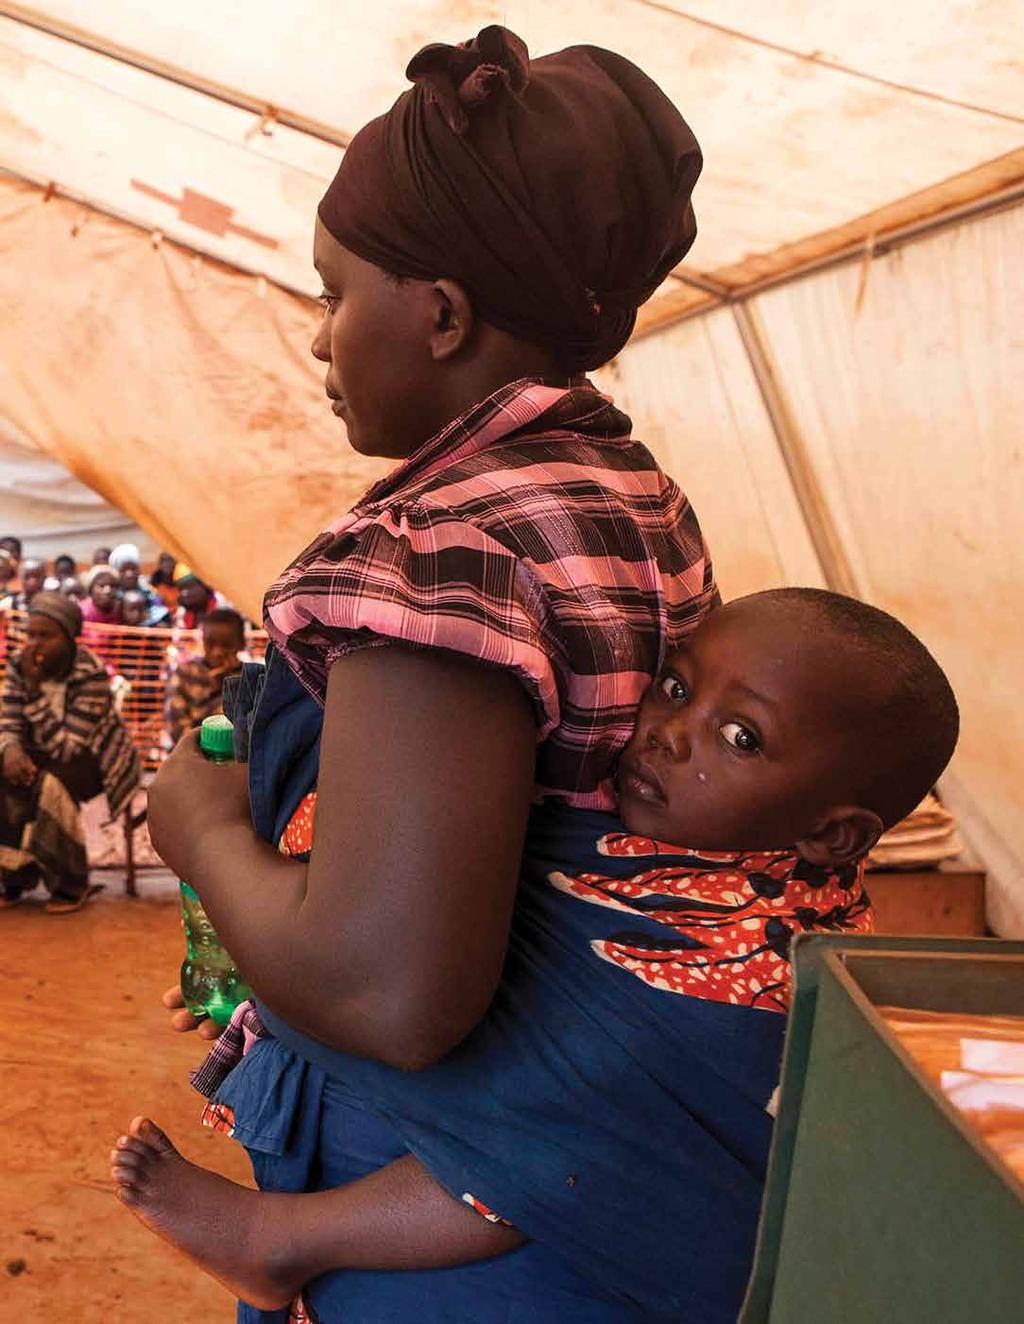 IN DEPTH: BURUNDI CRISIS Burundi Crisis: In a forgotten refugee camp, your support provides life-saving care We make sure everyone can see the doctor, even if they have to wait.